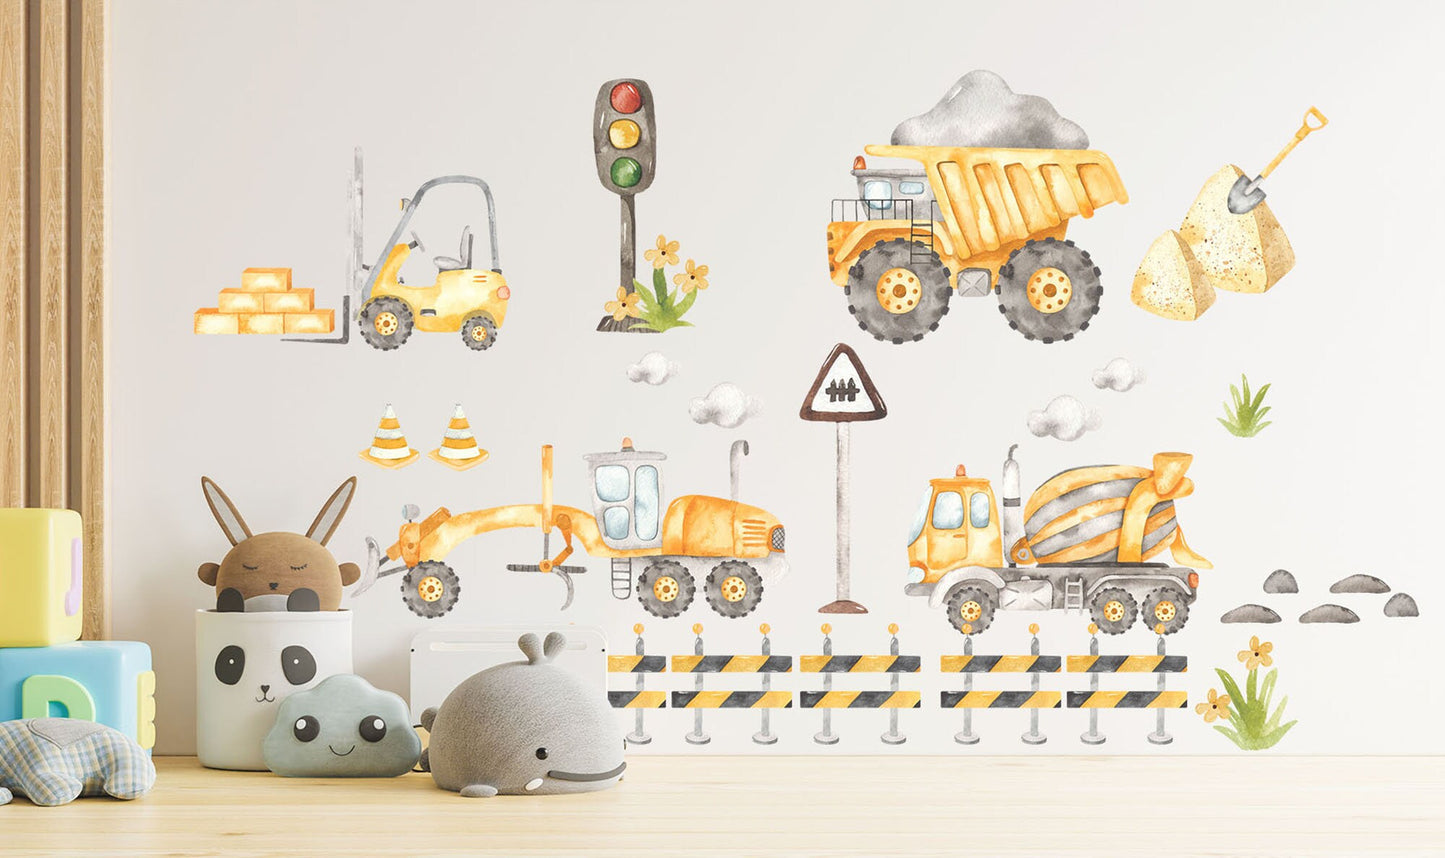 Trucks Bulldozer Tractors Diggers Behind Roadblocks Construction Site Removable Wall Decal - Boys Room Gift - BR175